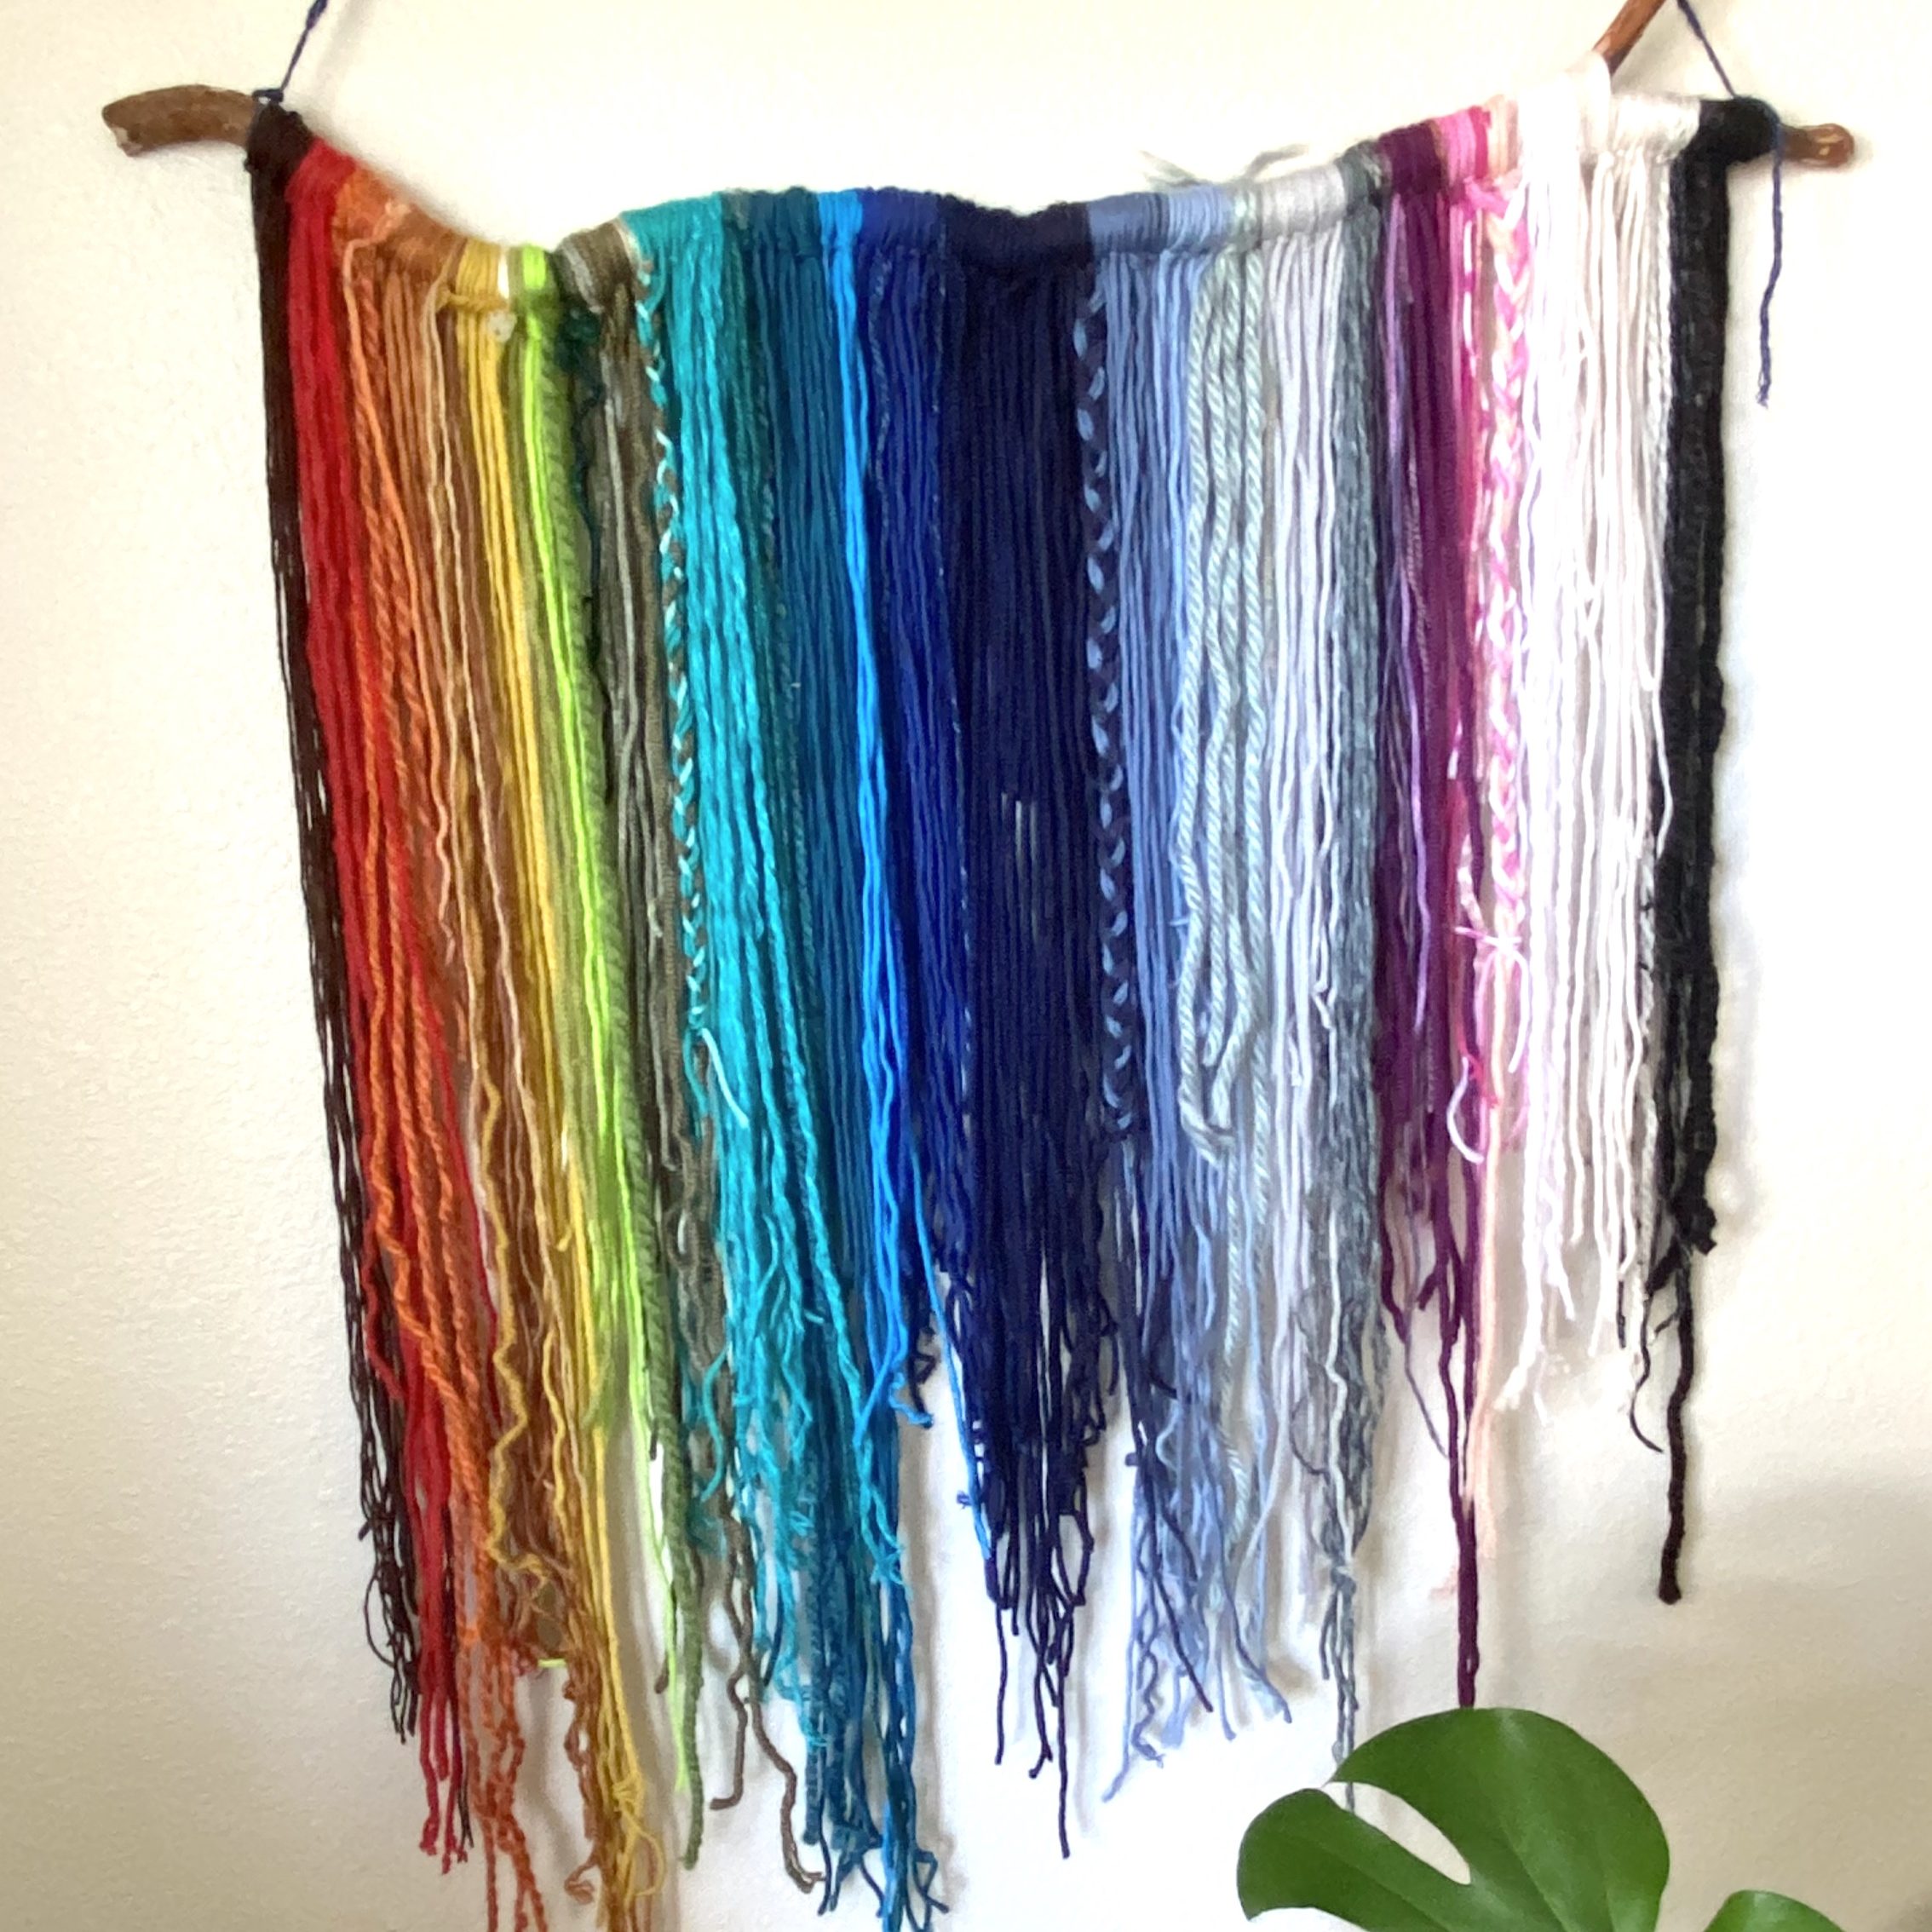 wall-hanging with rainbow yarn hanging from rustic stick with monstera leaf